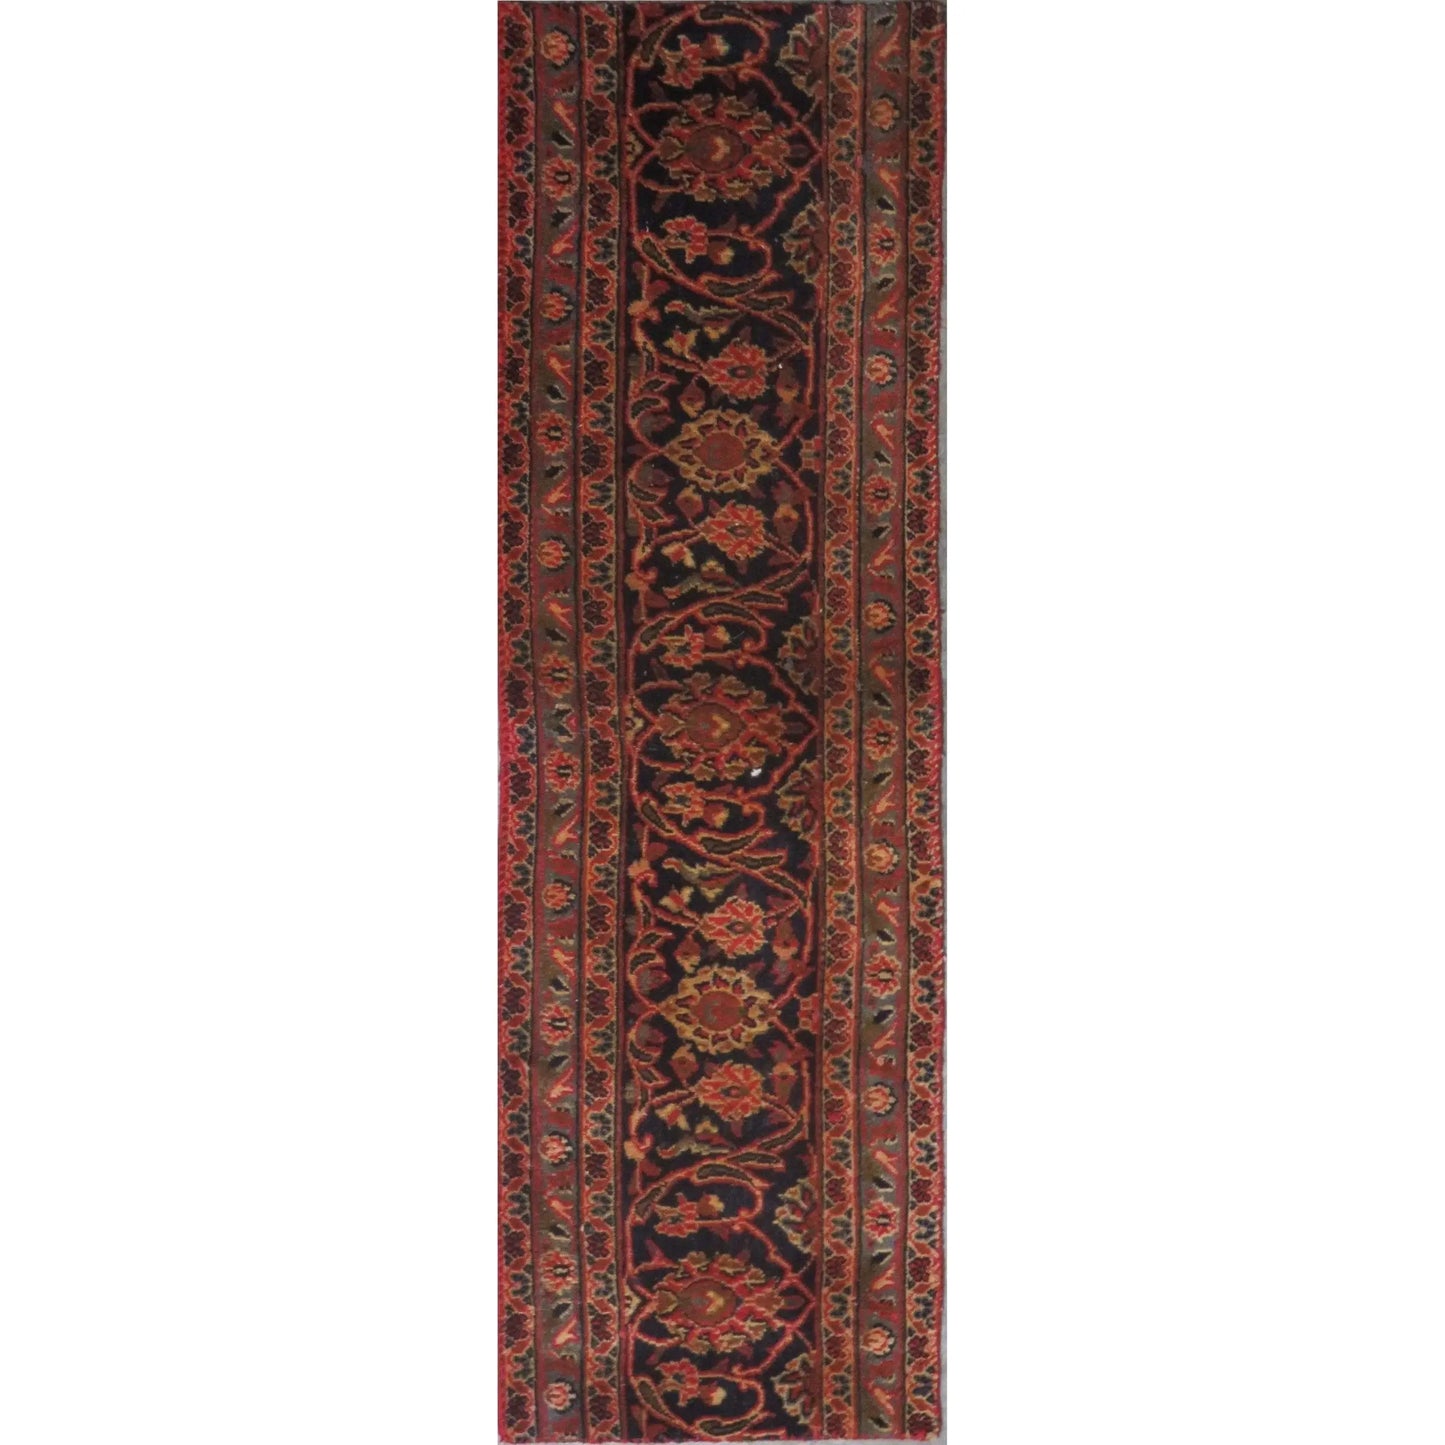 Hand-Knotted Persian Wool Rug _ Luxurious Vintage Design, 4'7" x 1'0", Artisan Crafted